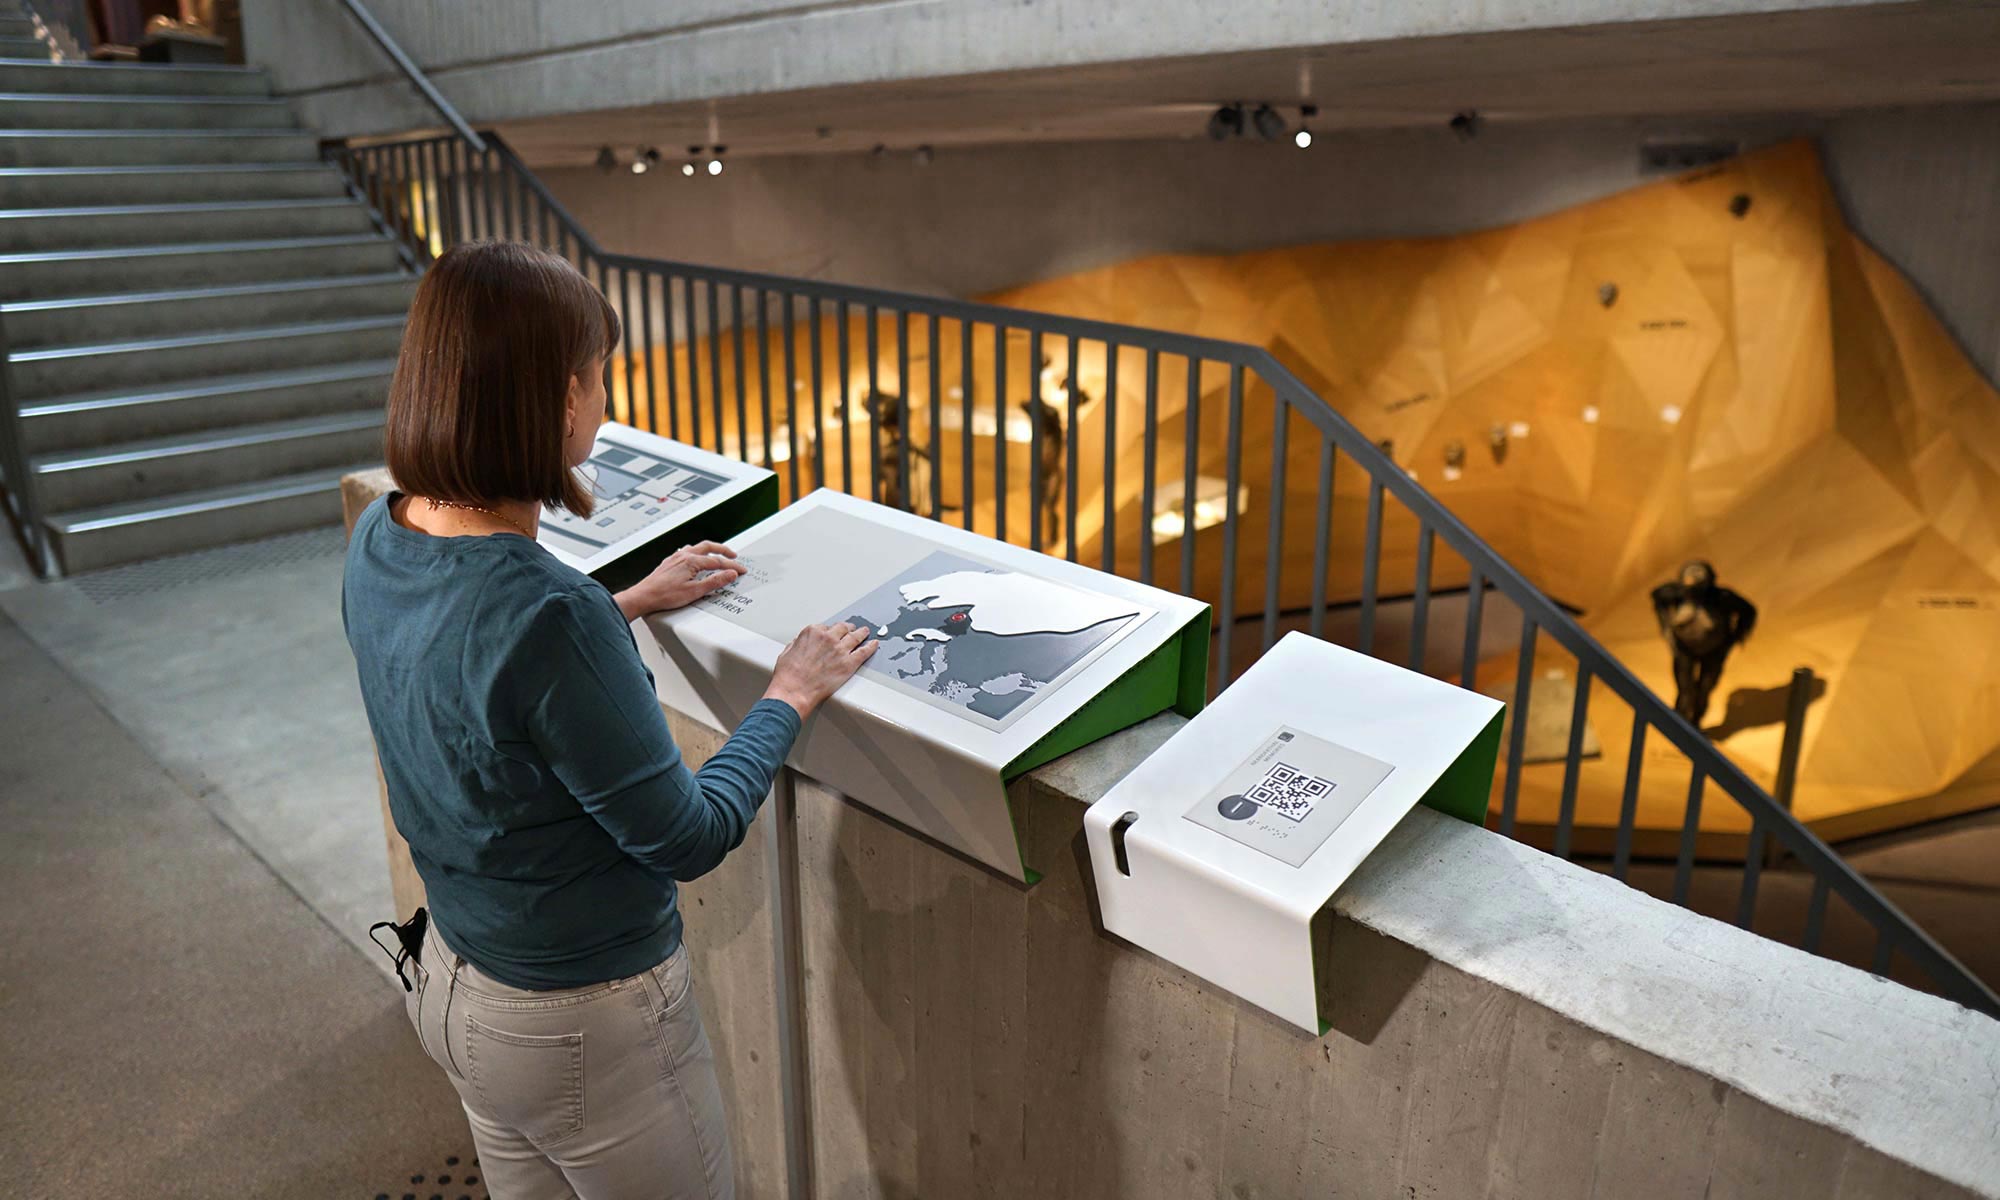 Tamara Ströter stands at a tactile model on which a map of Europe is depicted. This tactile model is a curved shape made of sheet steel, which is mounted on a wall offset at a slight angle. Behind the wall is a staircase that leads to other floors of the museum. Looking out over the banister, one has a view of parts of the exhibition on the lower floor.